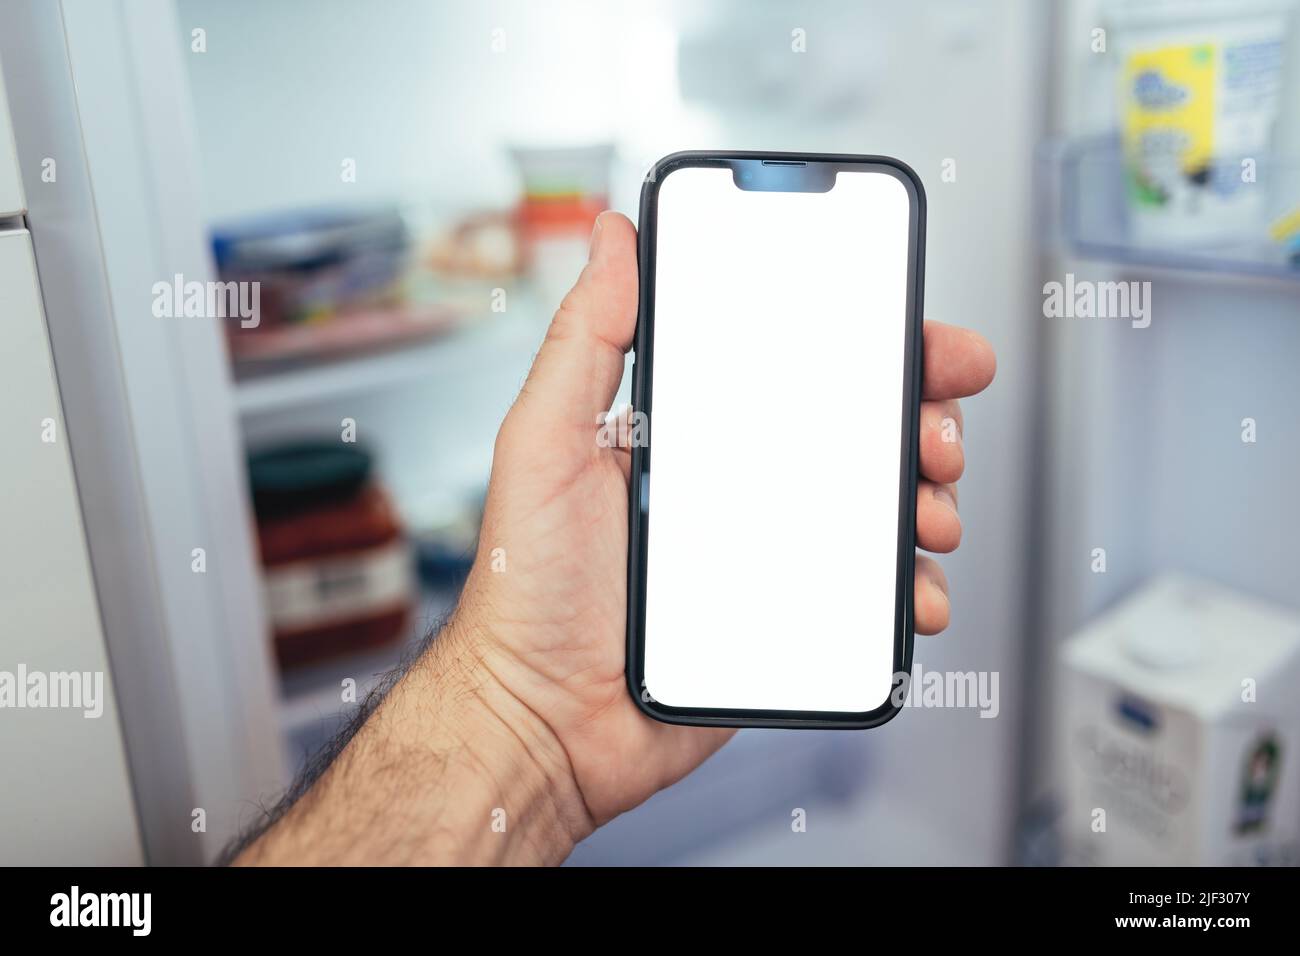 Internet of things smartphone mockup concept, man holding smart mobile phone with blank screen in front of refrigerator and checking on groceries supp Stock Photo